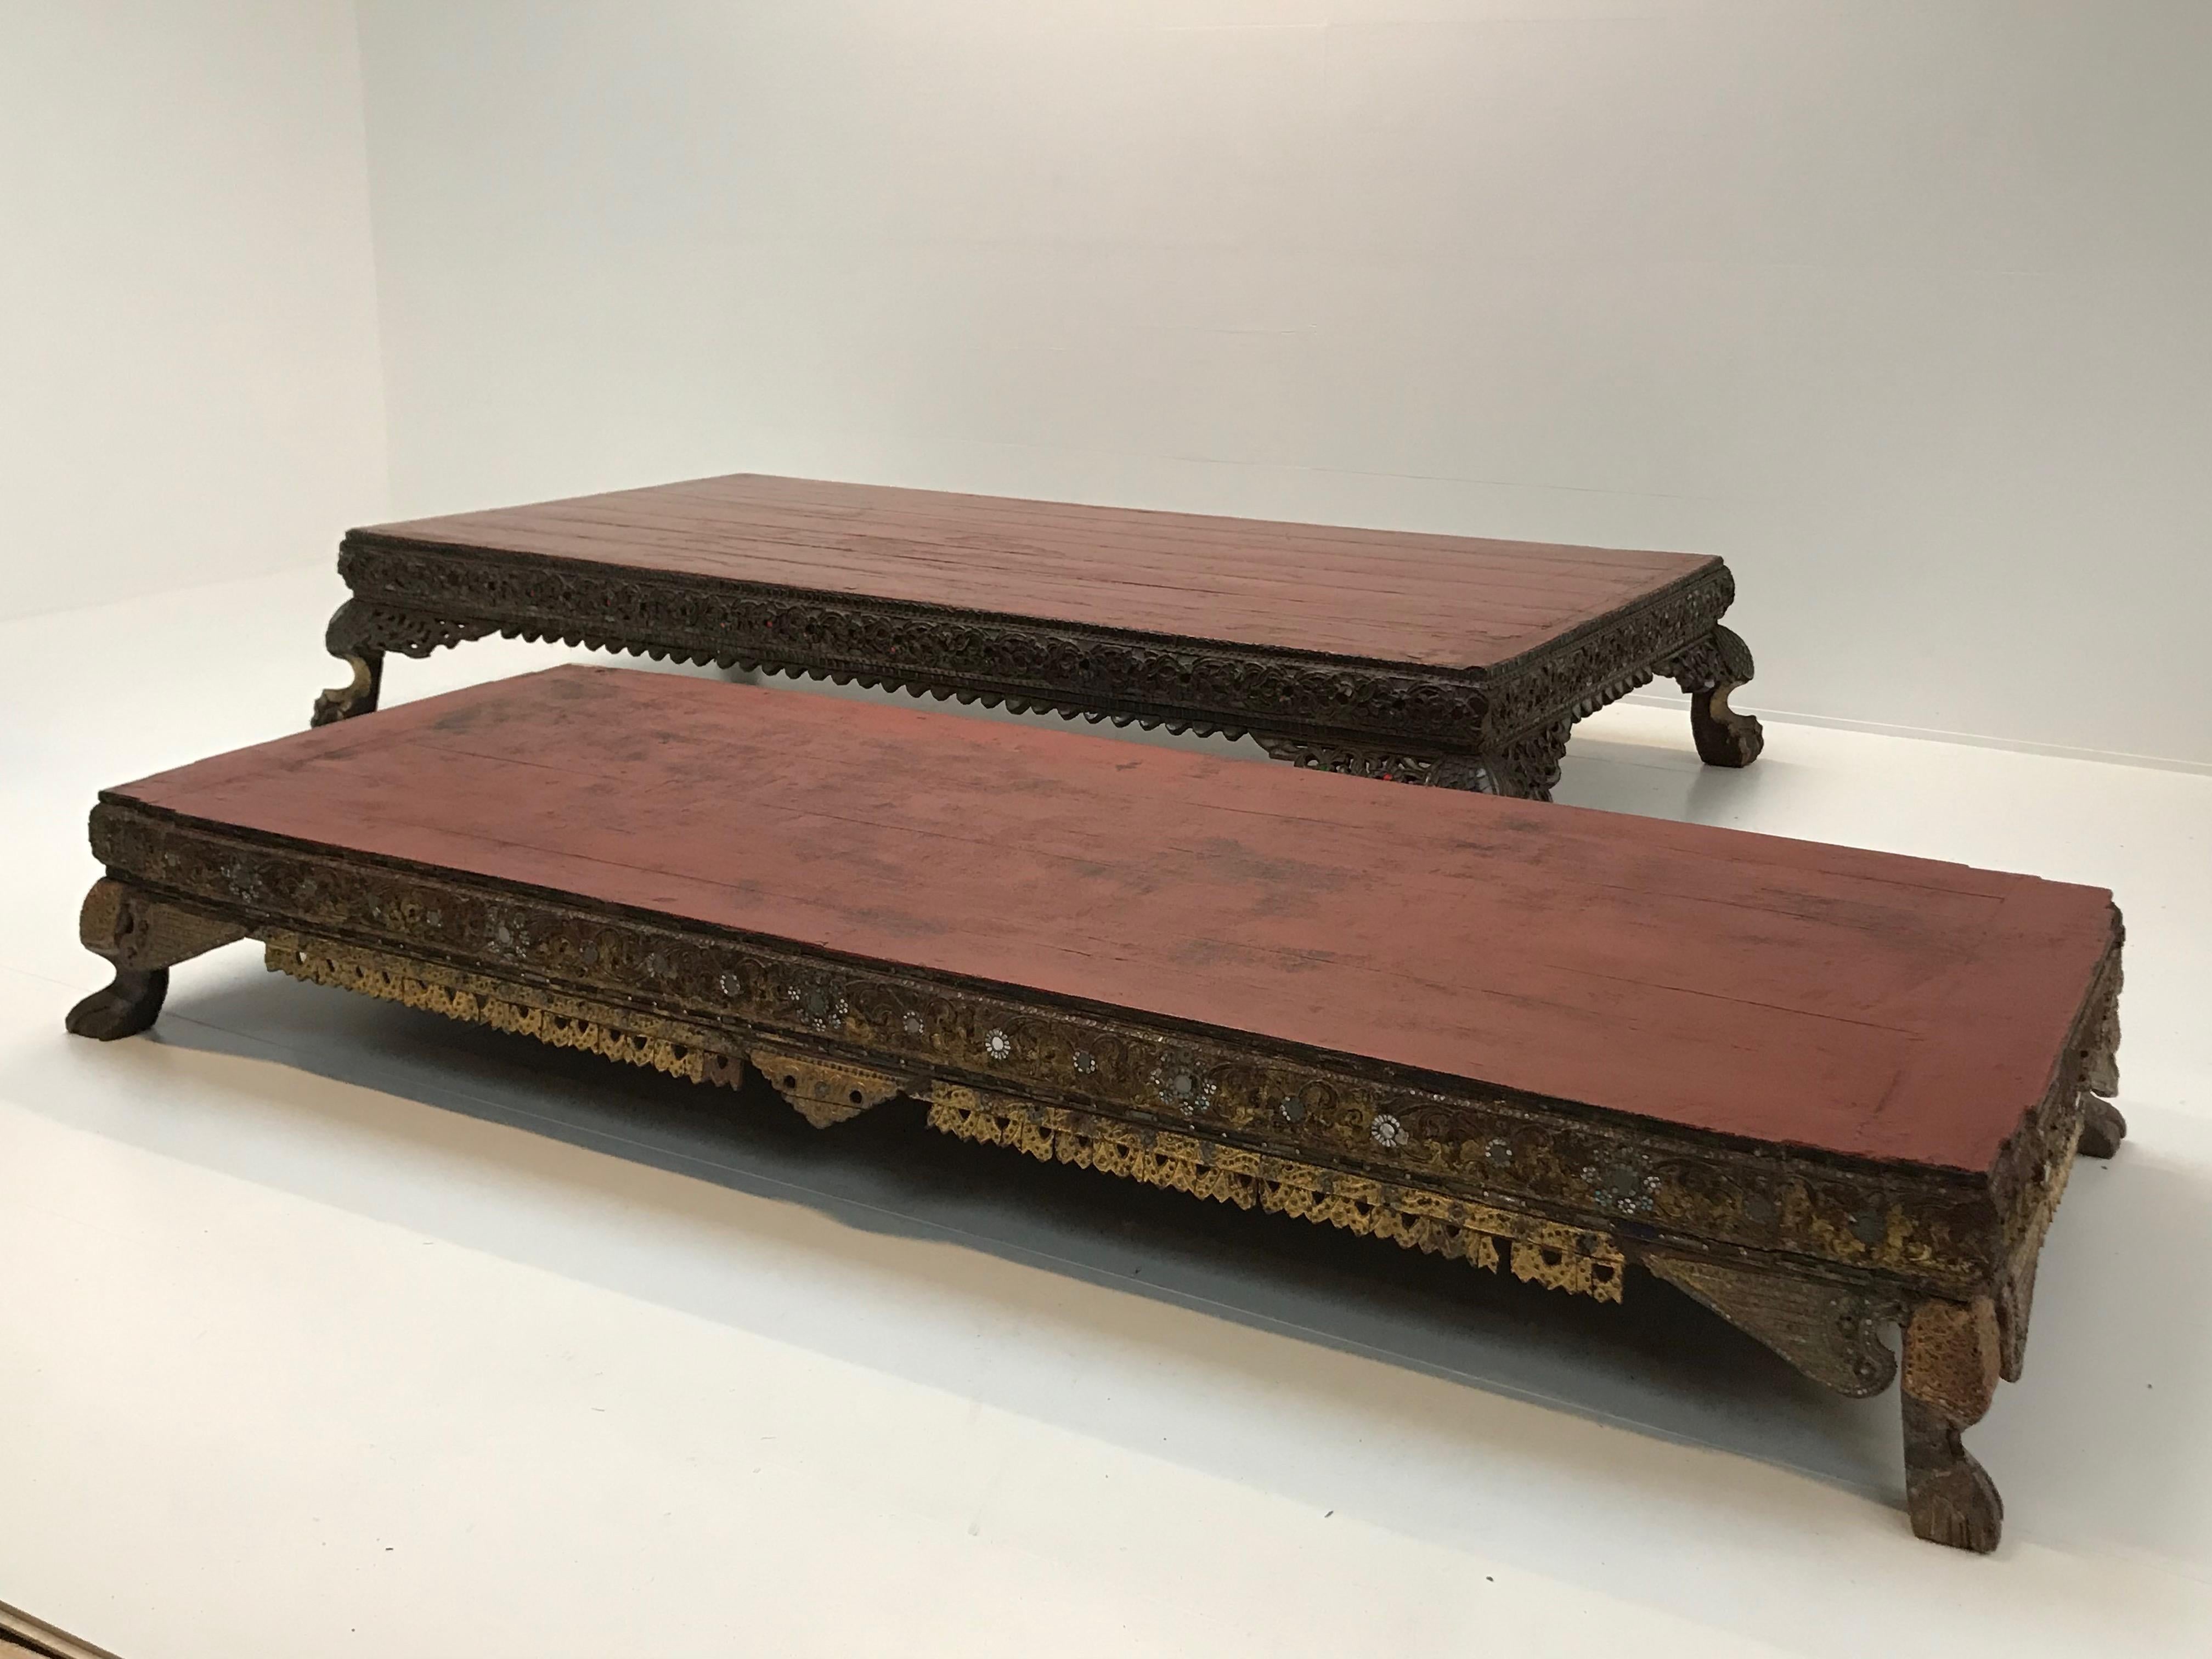 Burmese Table, 18th Century, Red Lacquer In Good Condition For Sale In Schellebelle, BE